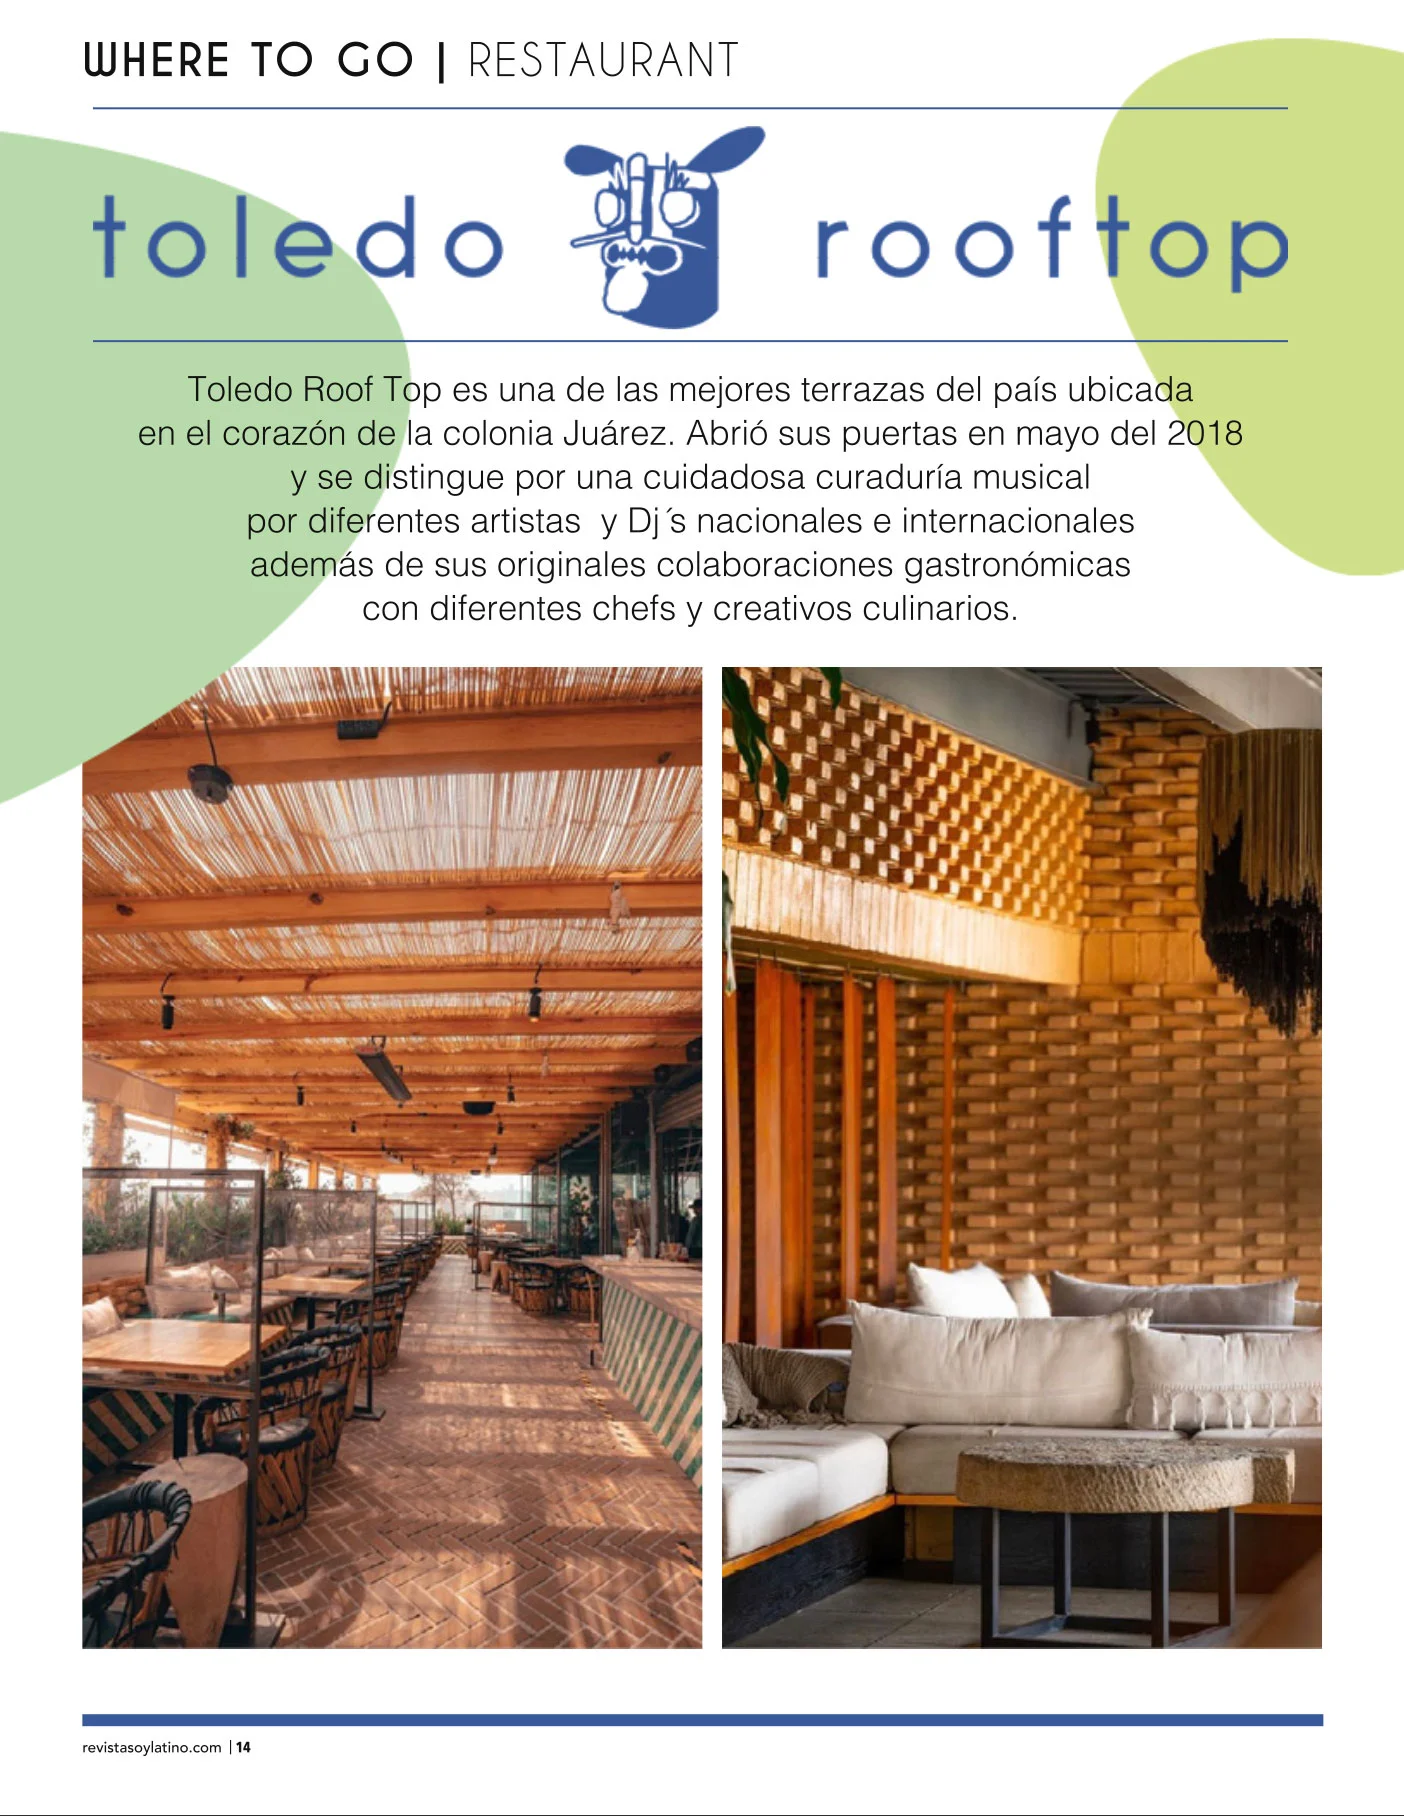 toledo-rooftop-page-1